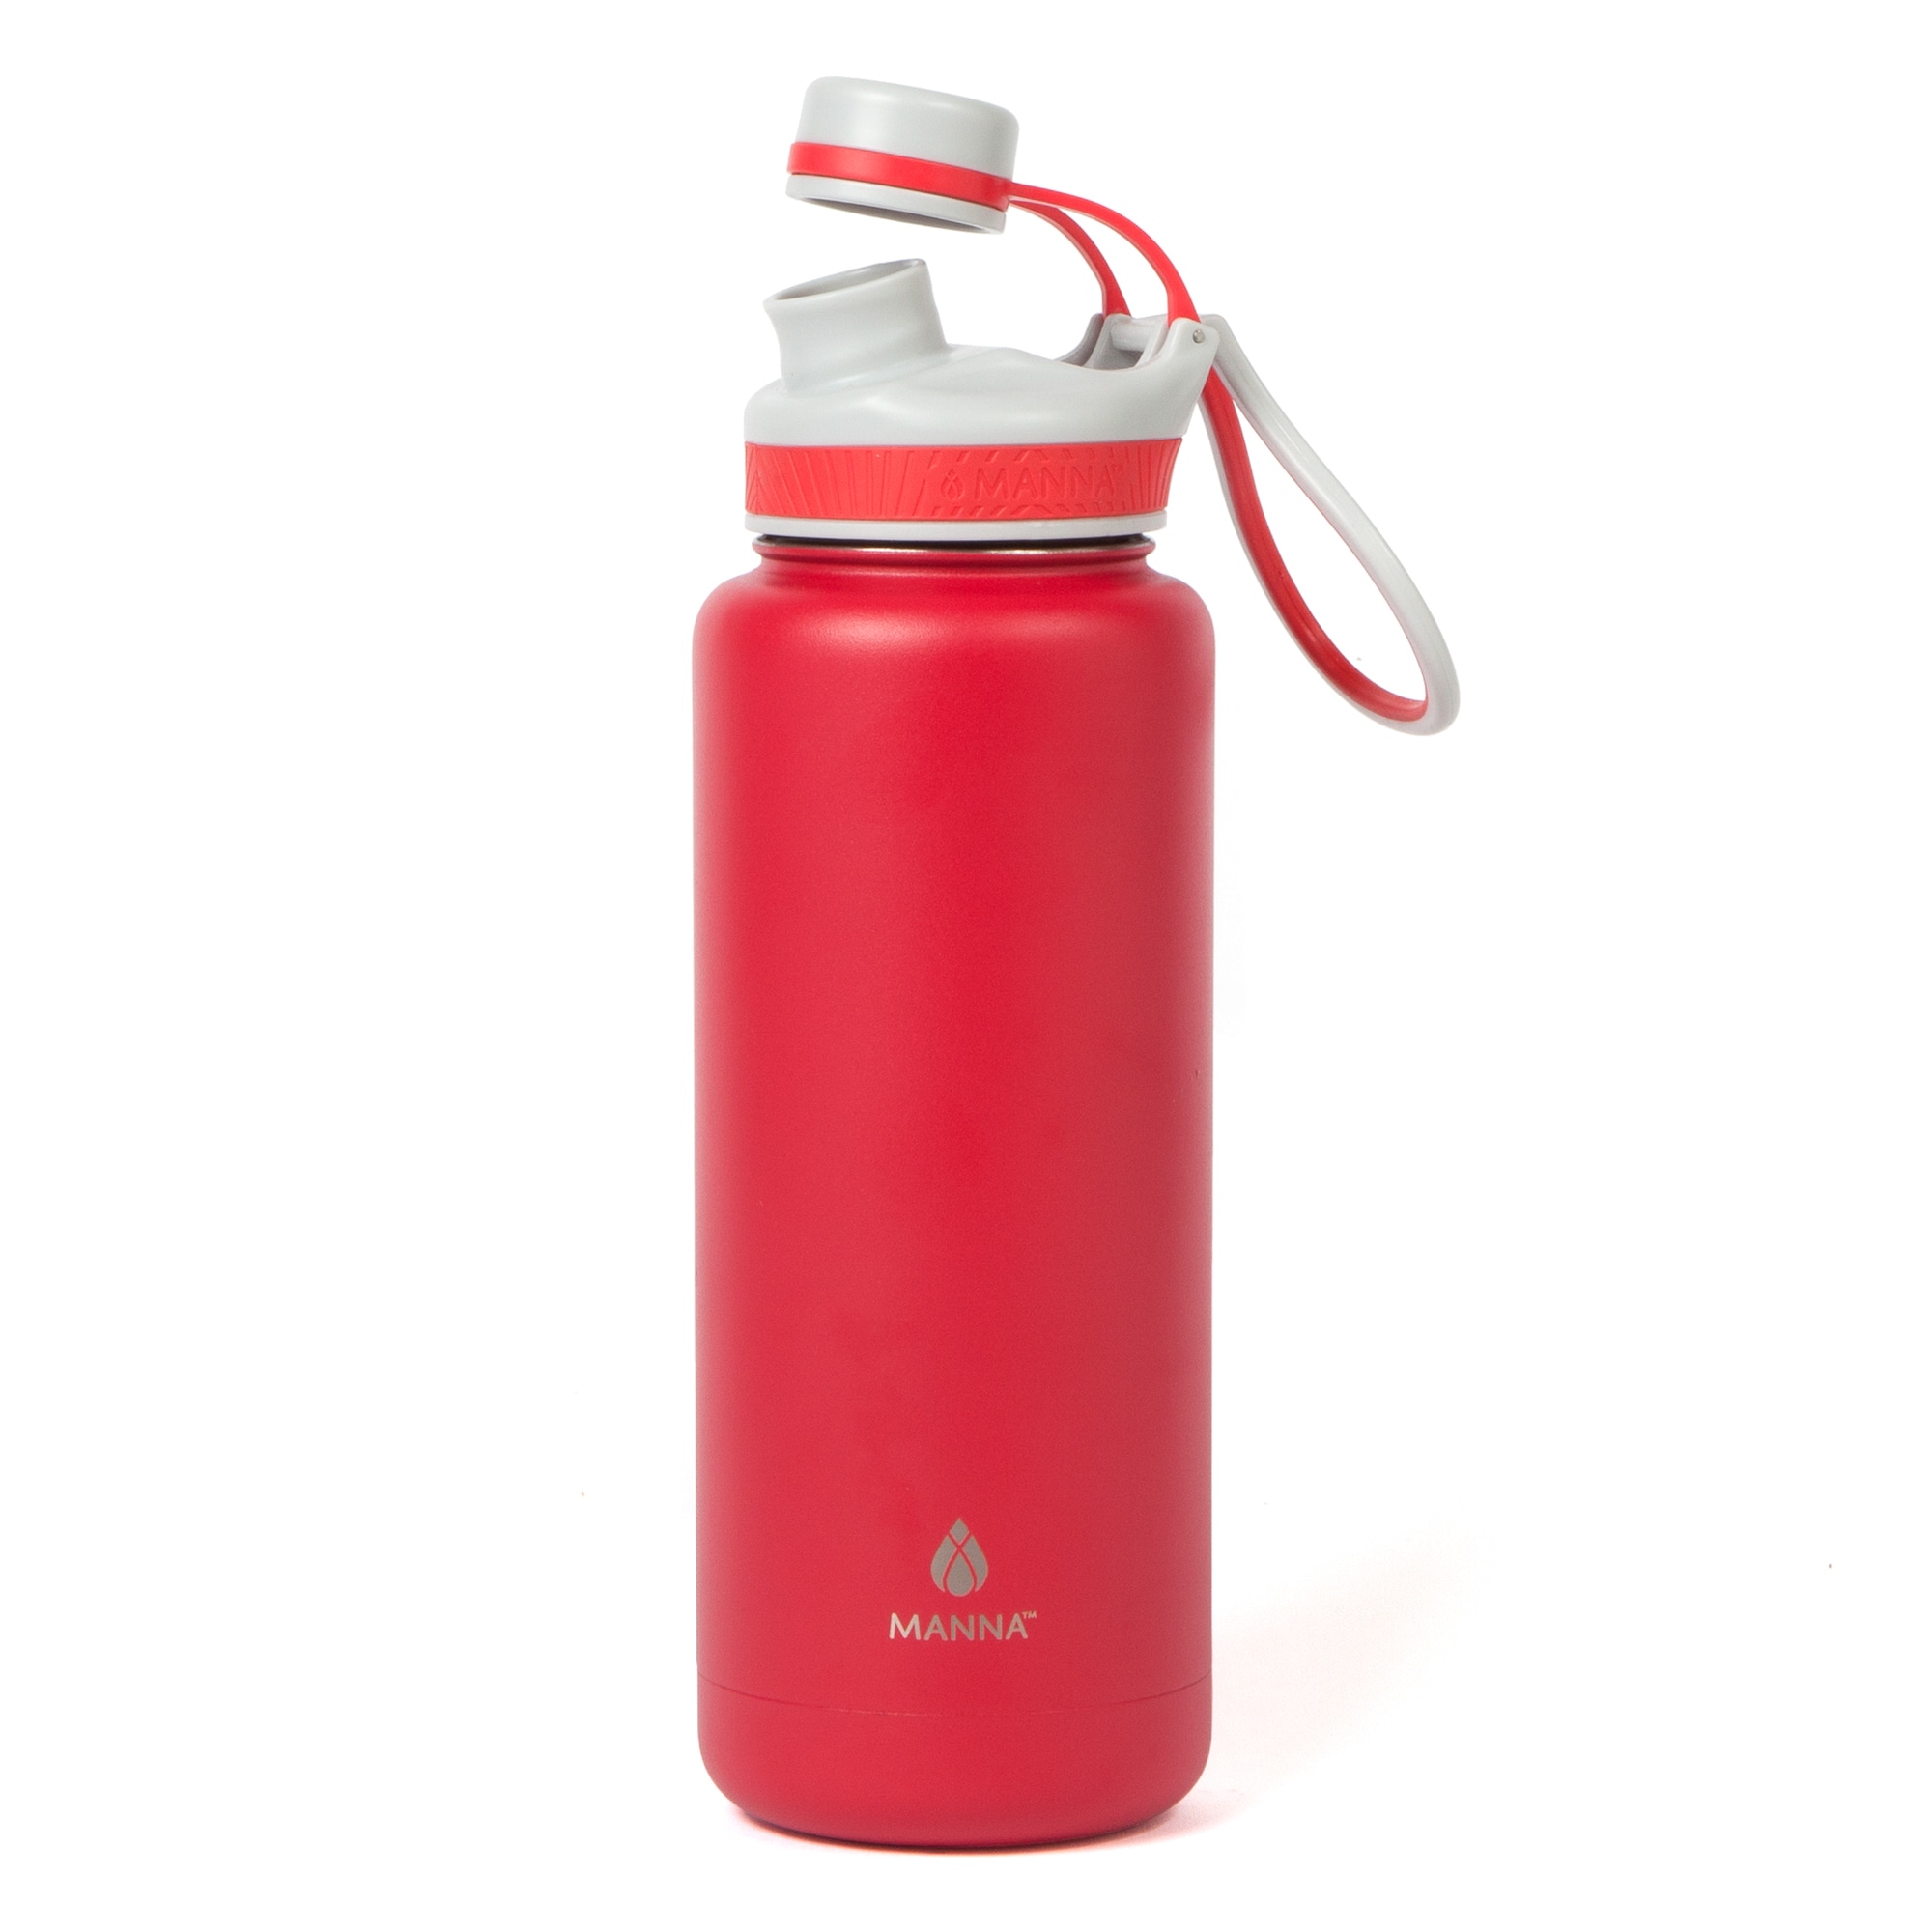 Tru Flask 40-fl oz Stainless Steel Insulated Water Bottle in the